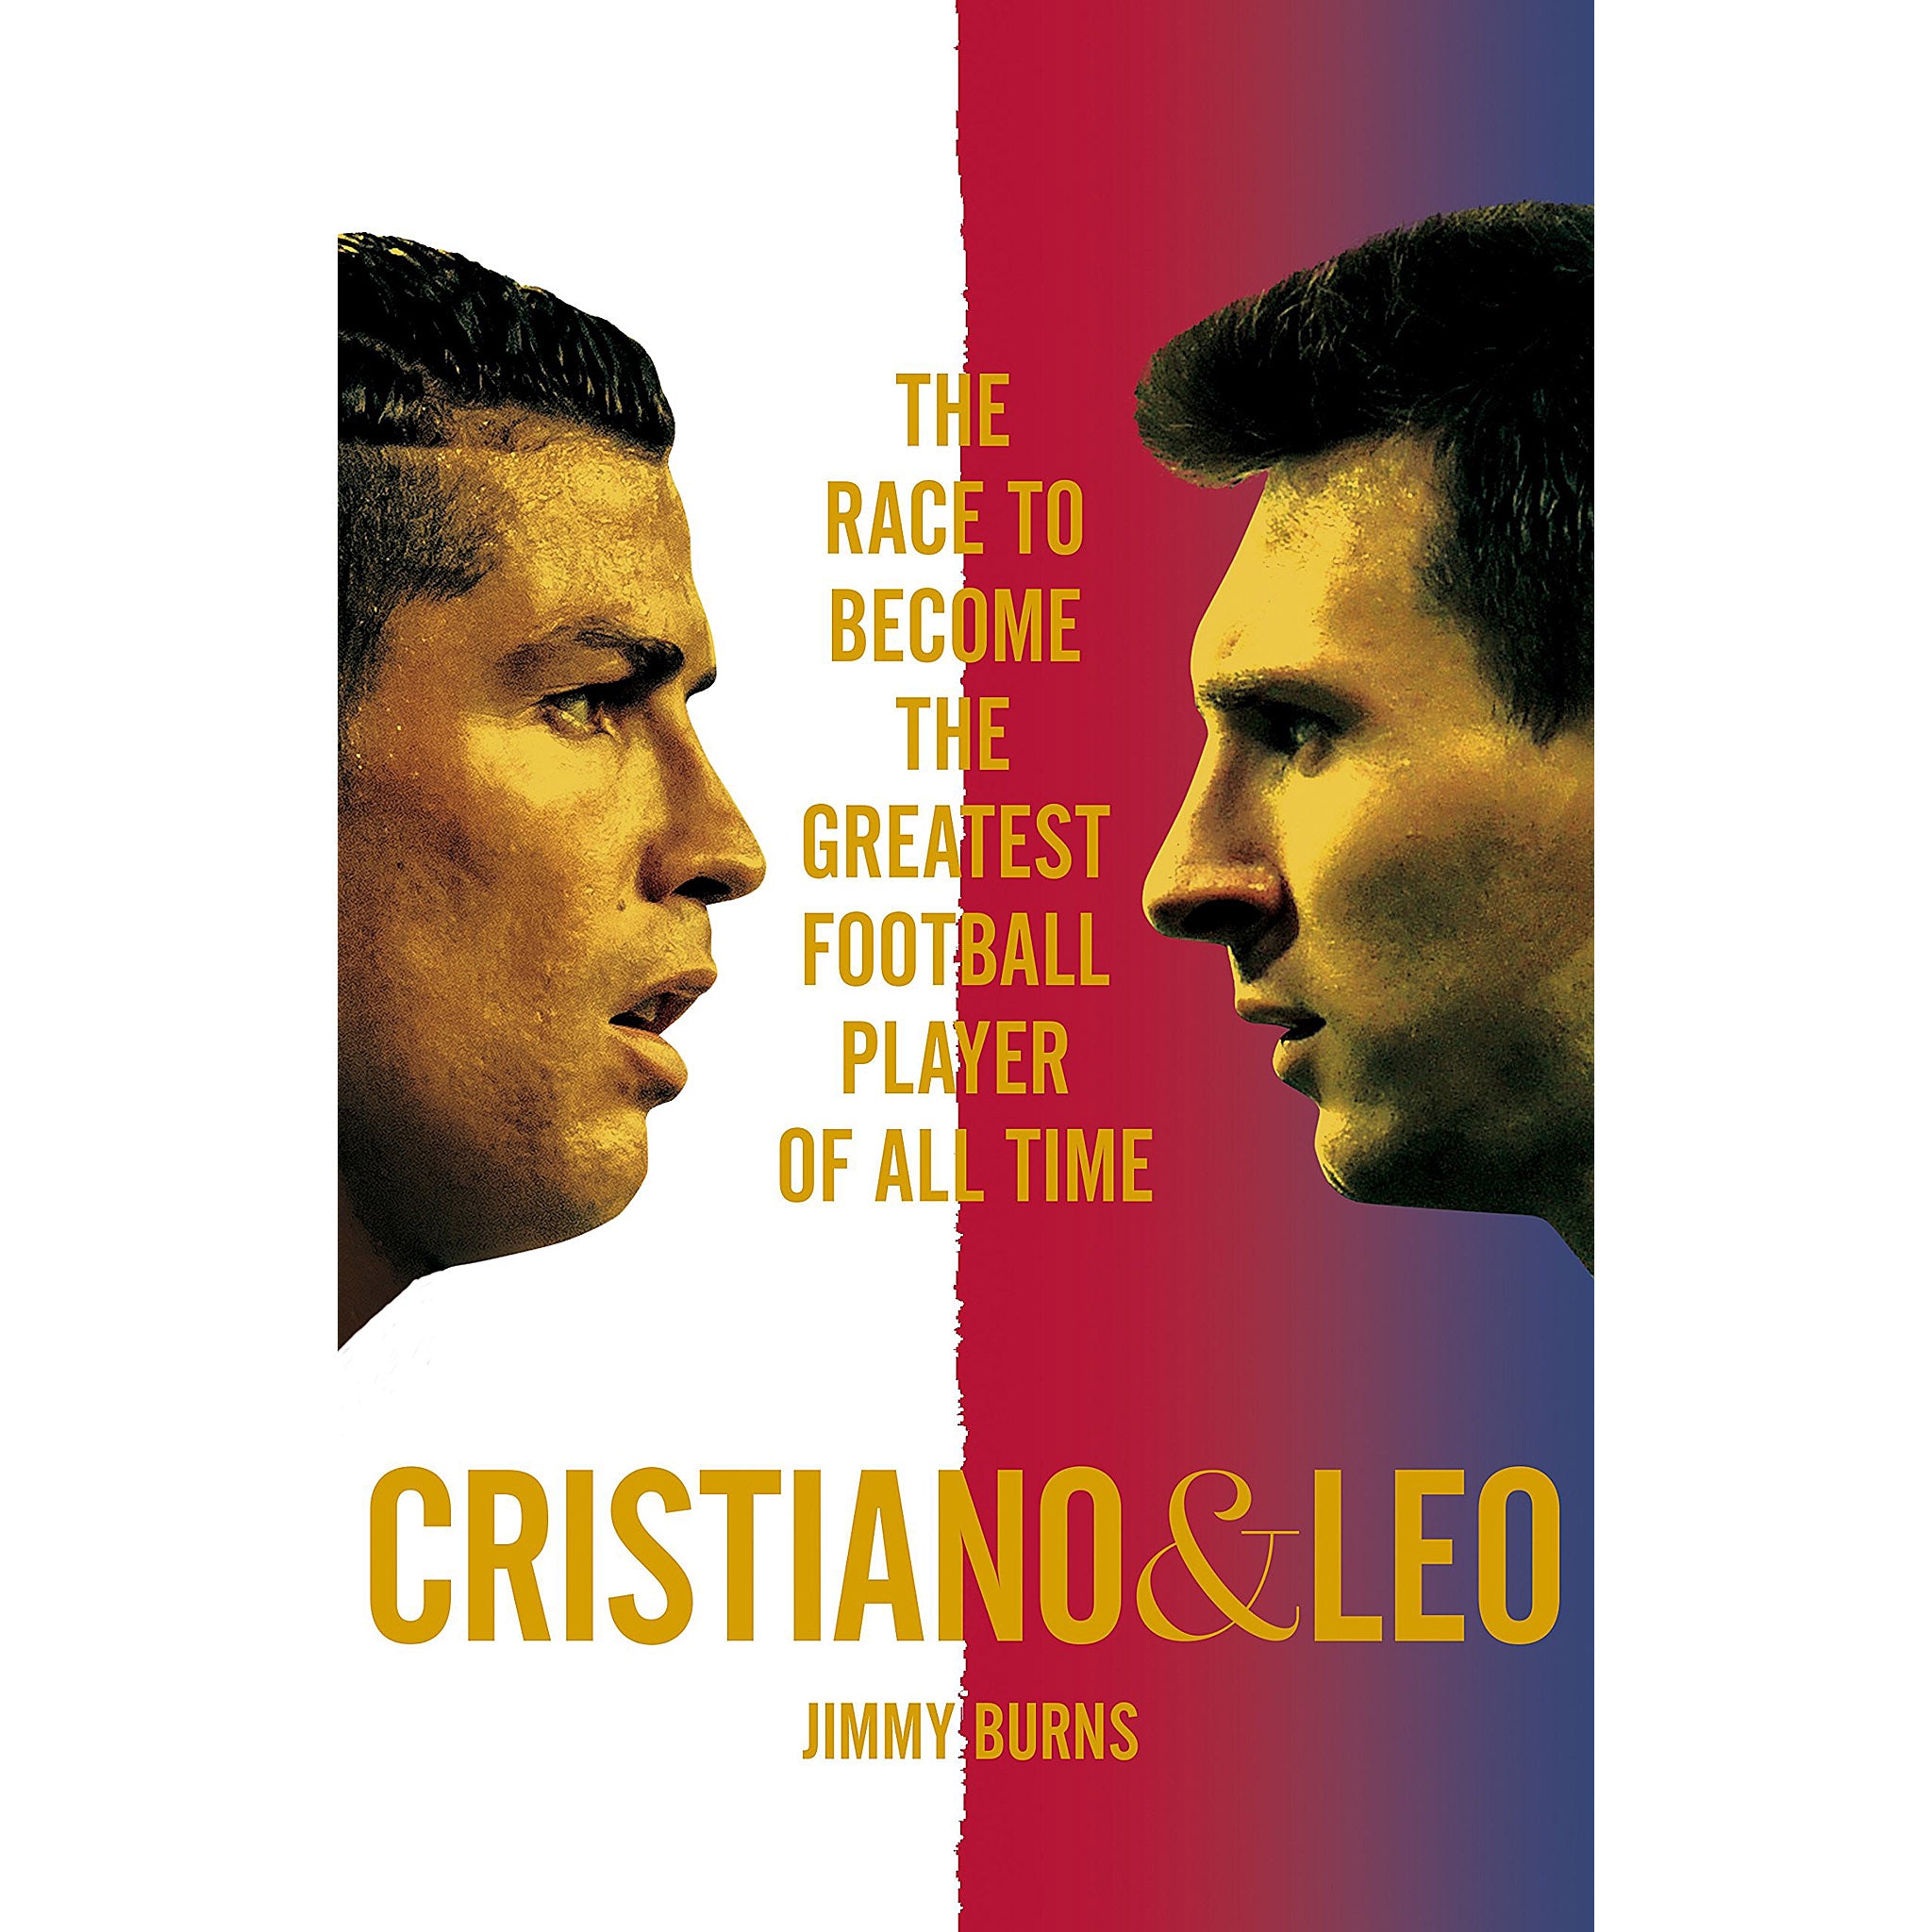 Cristiano & Leo – The Race to Become the Greatest Football Player of All Time